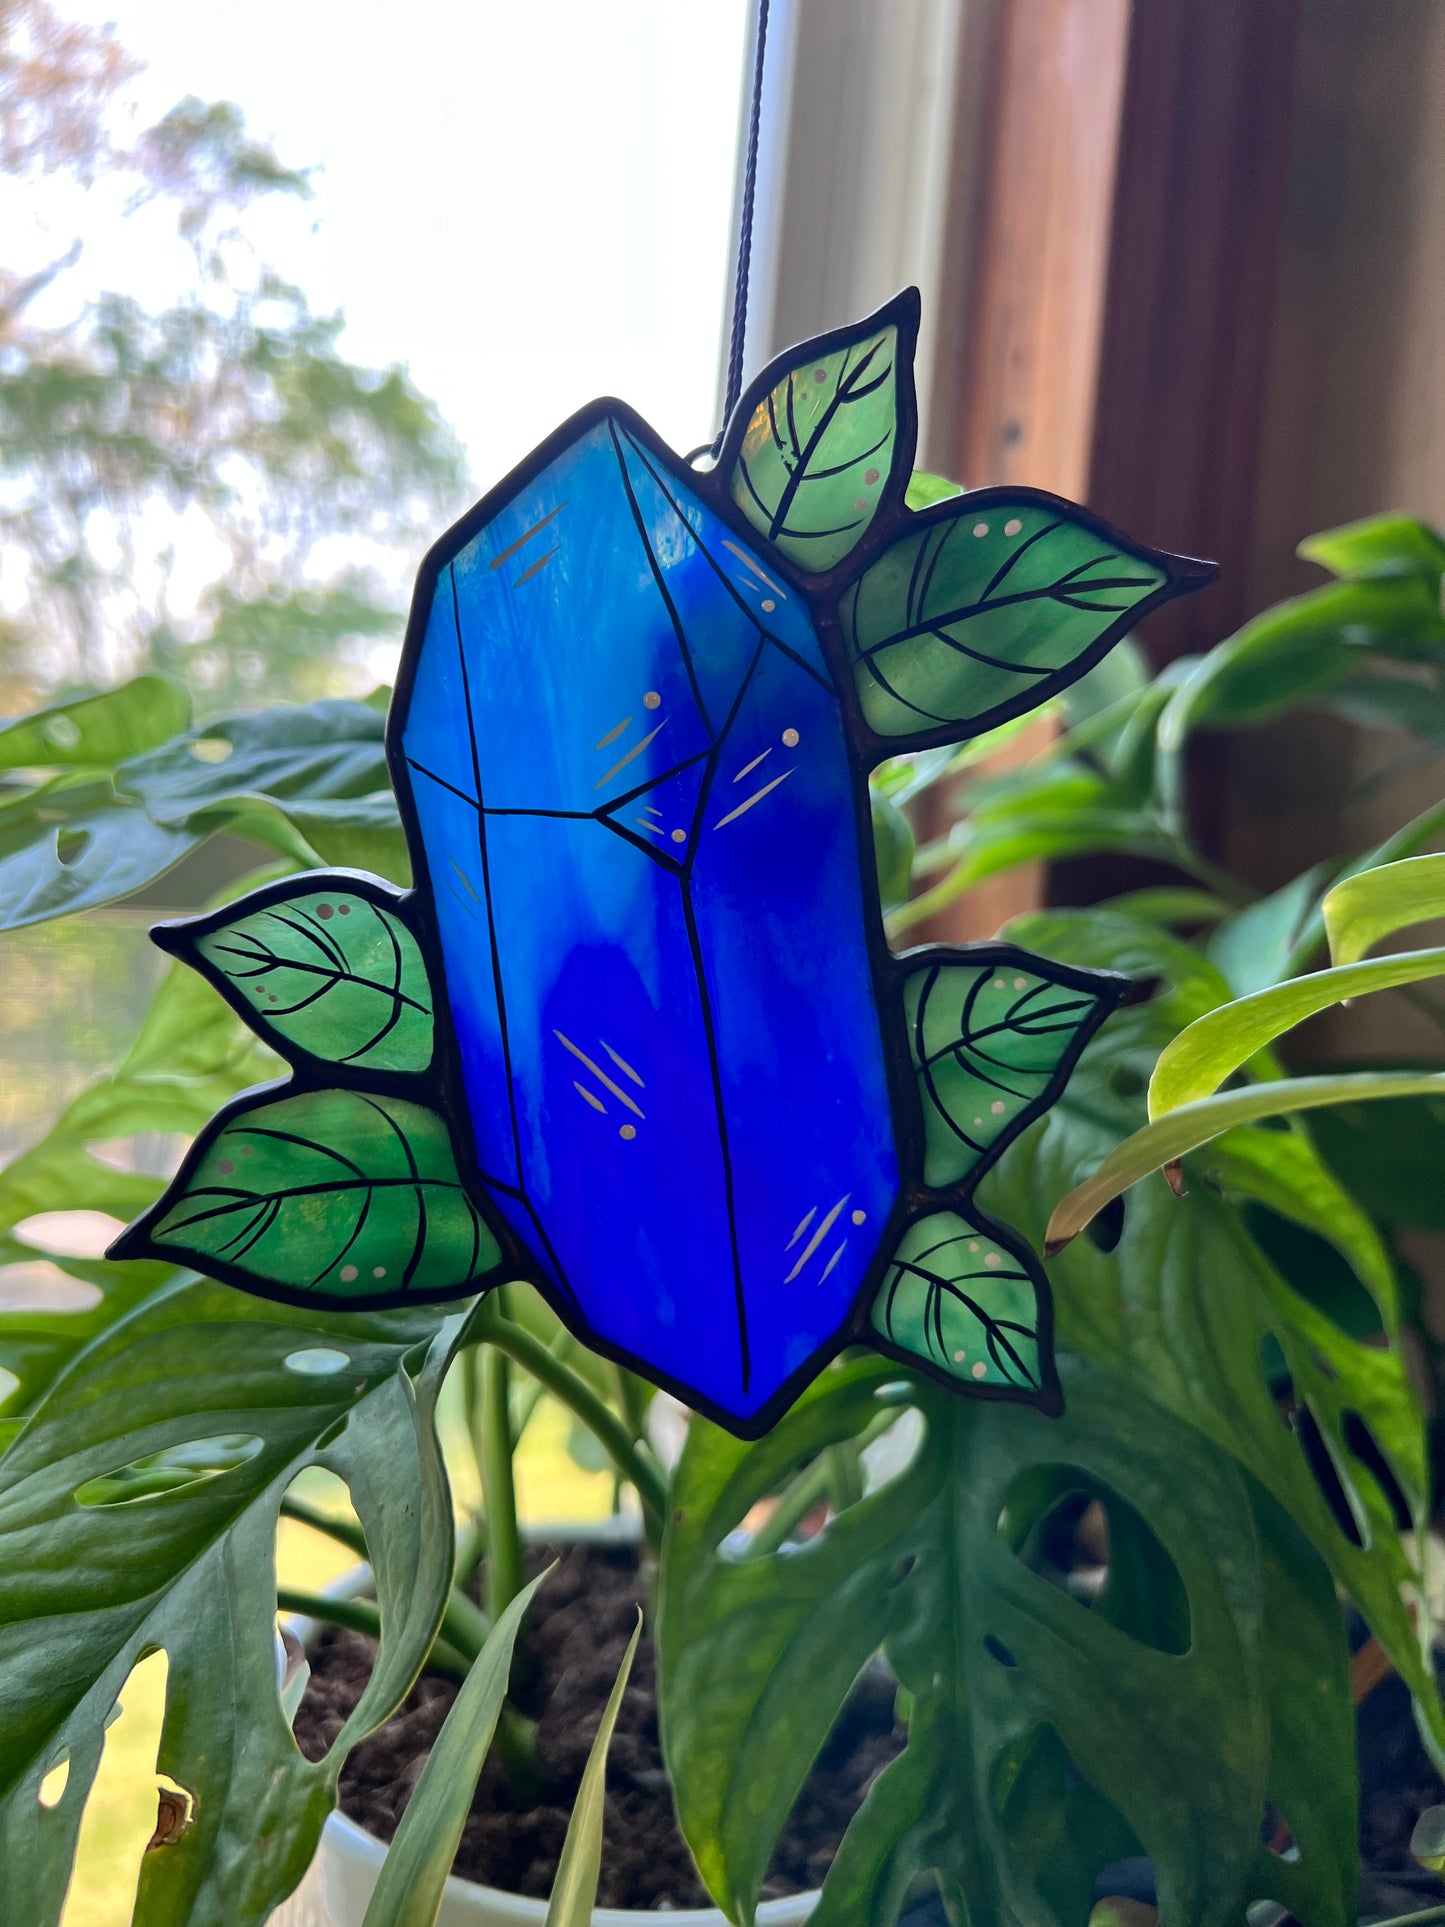 Crystals - Stained Glass